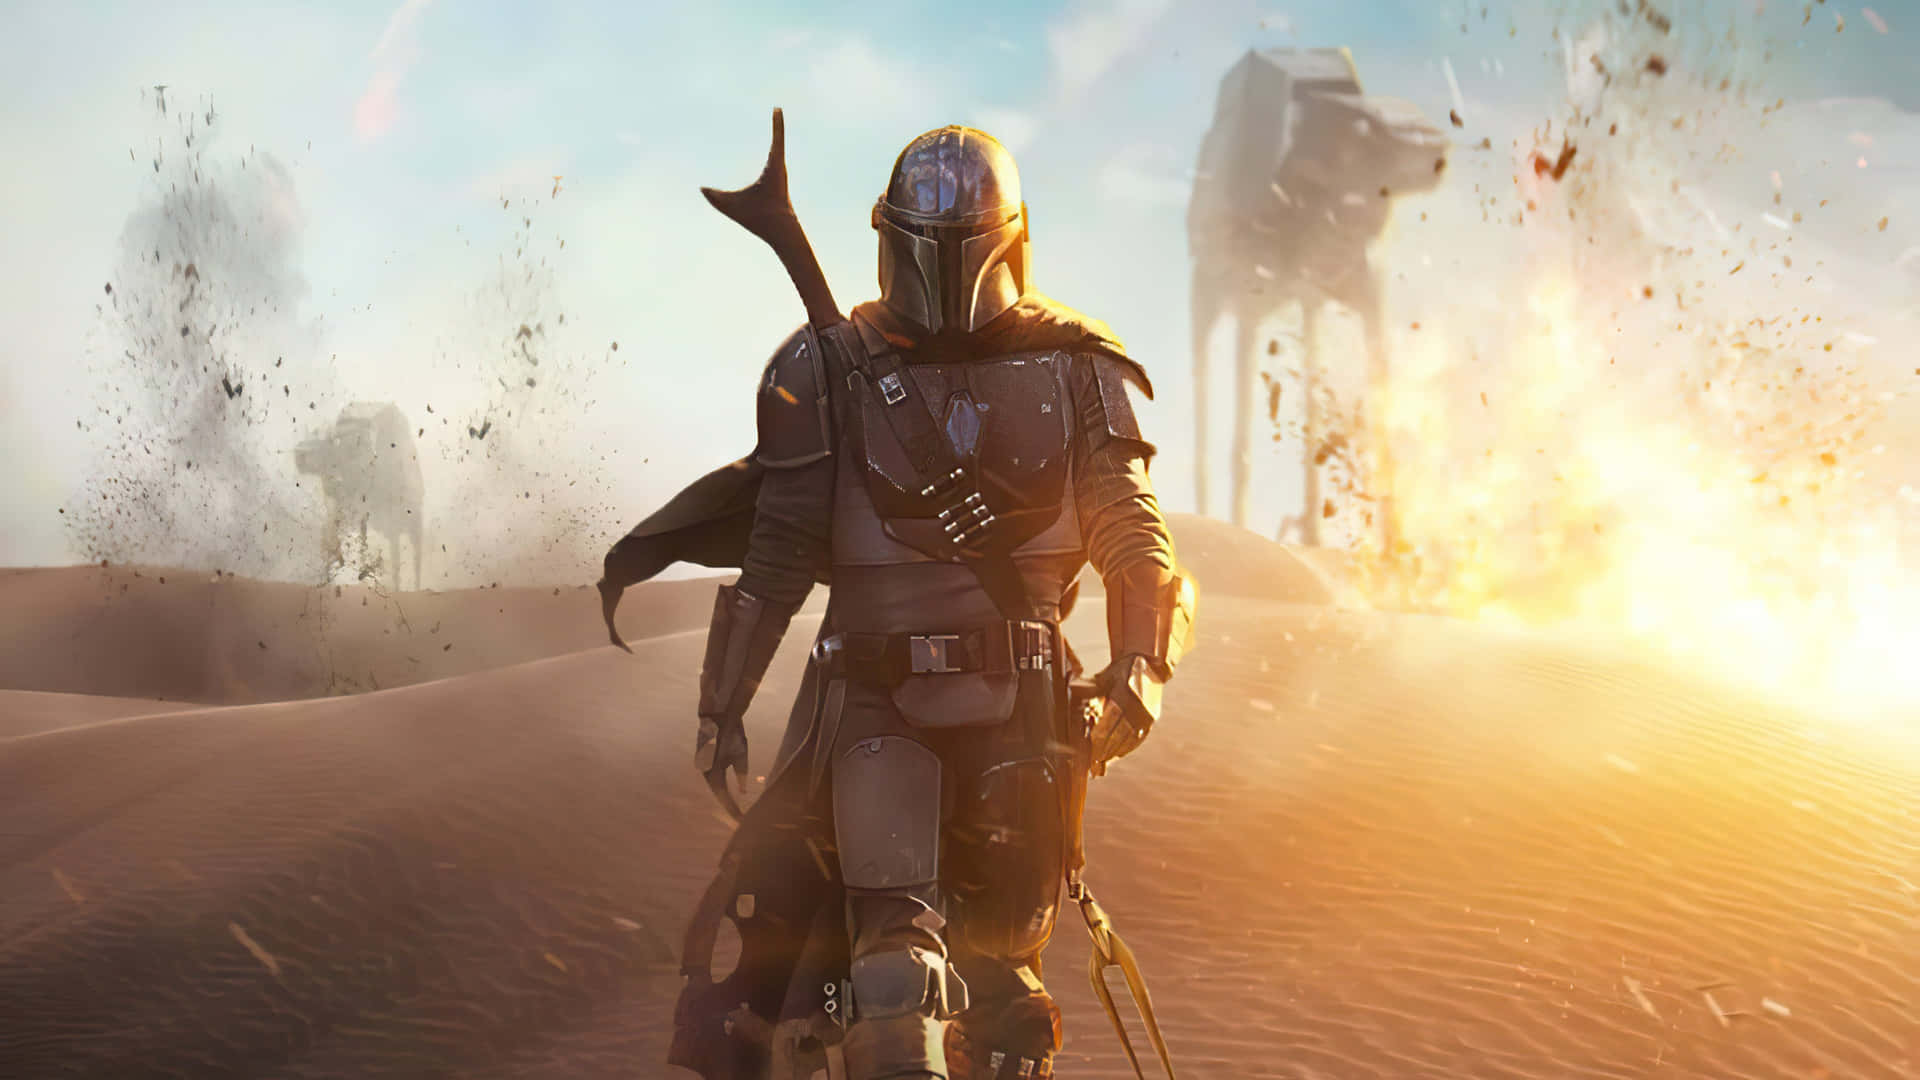 The Mandalorian - Courage and Adventure in a Distant Galaxy